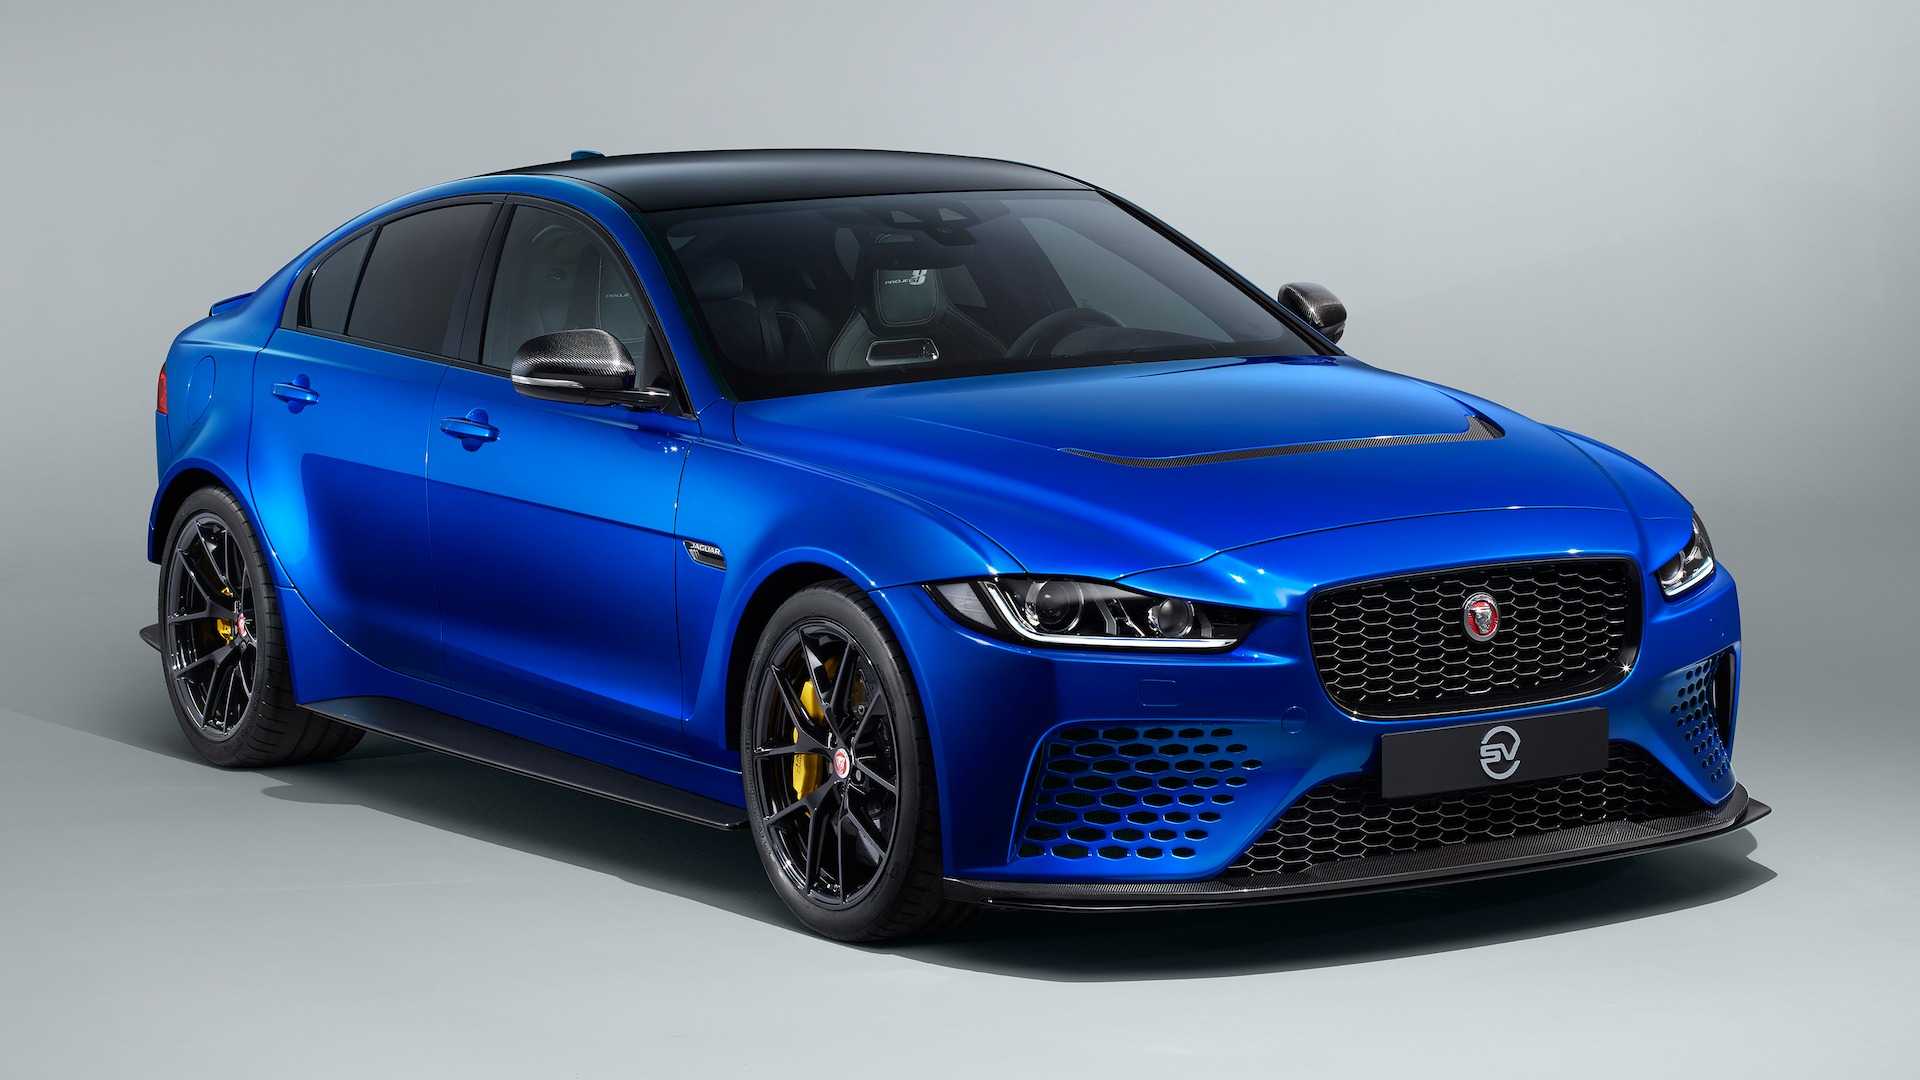 Jaguar XE SV Project 8 Touring Limited Edition Revealed